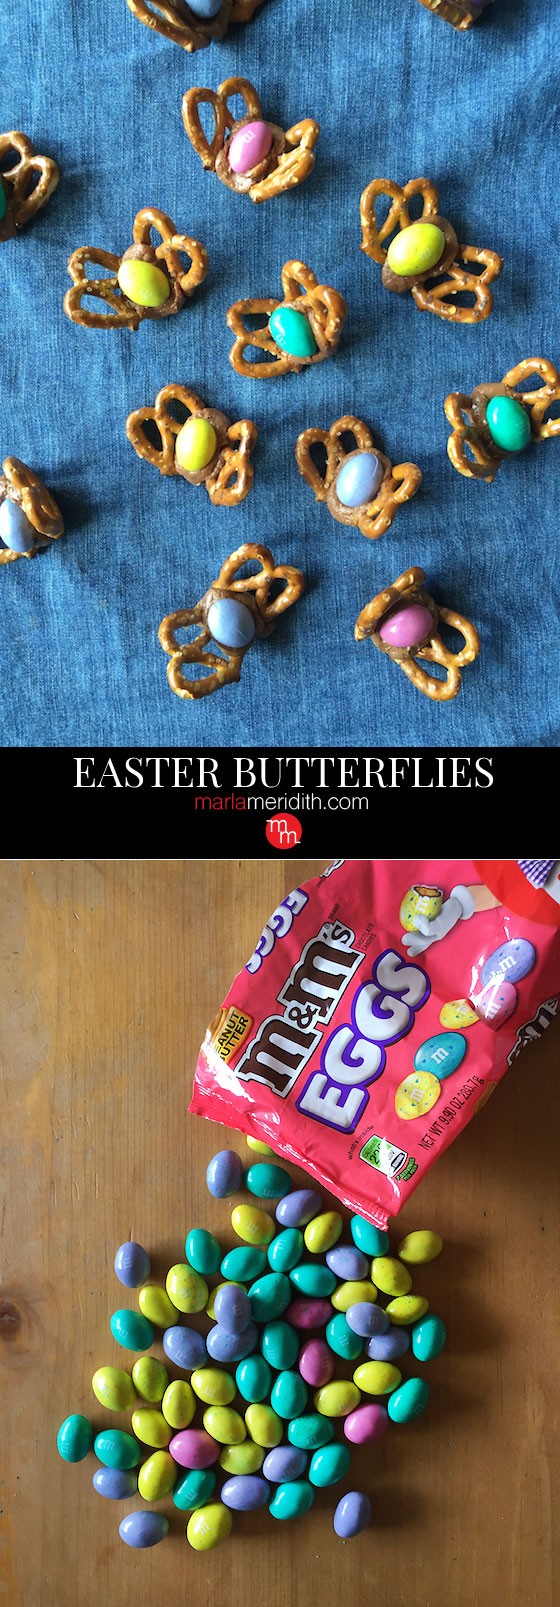 Make these Easter Butterflies with your kids. Only 3 ingredients & so fun! MarlaMeridith.com ( @marlameridith ) #craft #chocolate #Easter